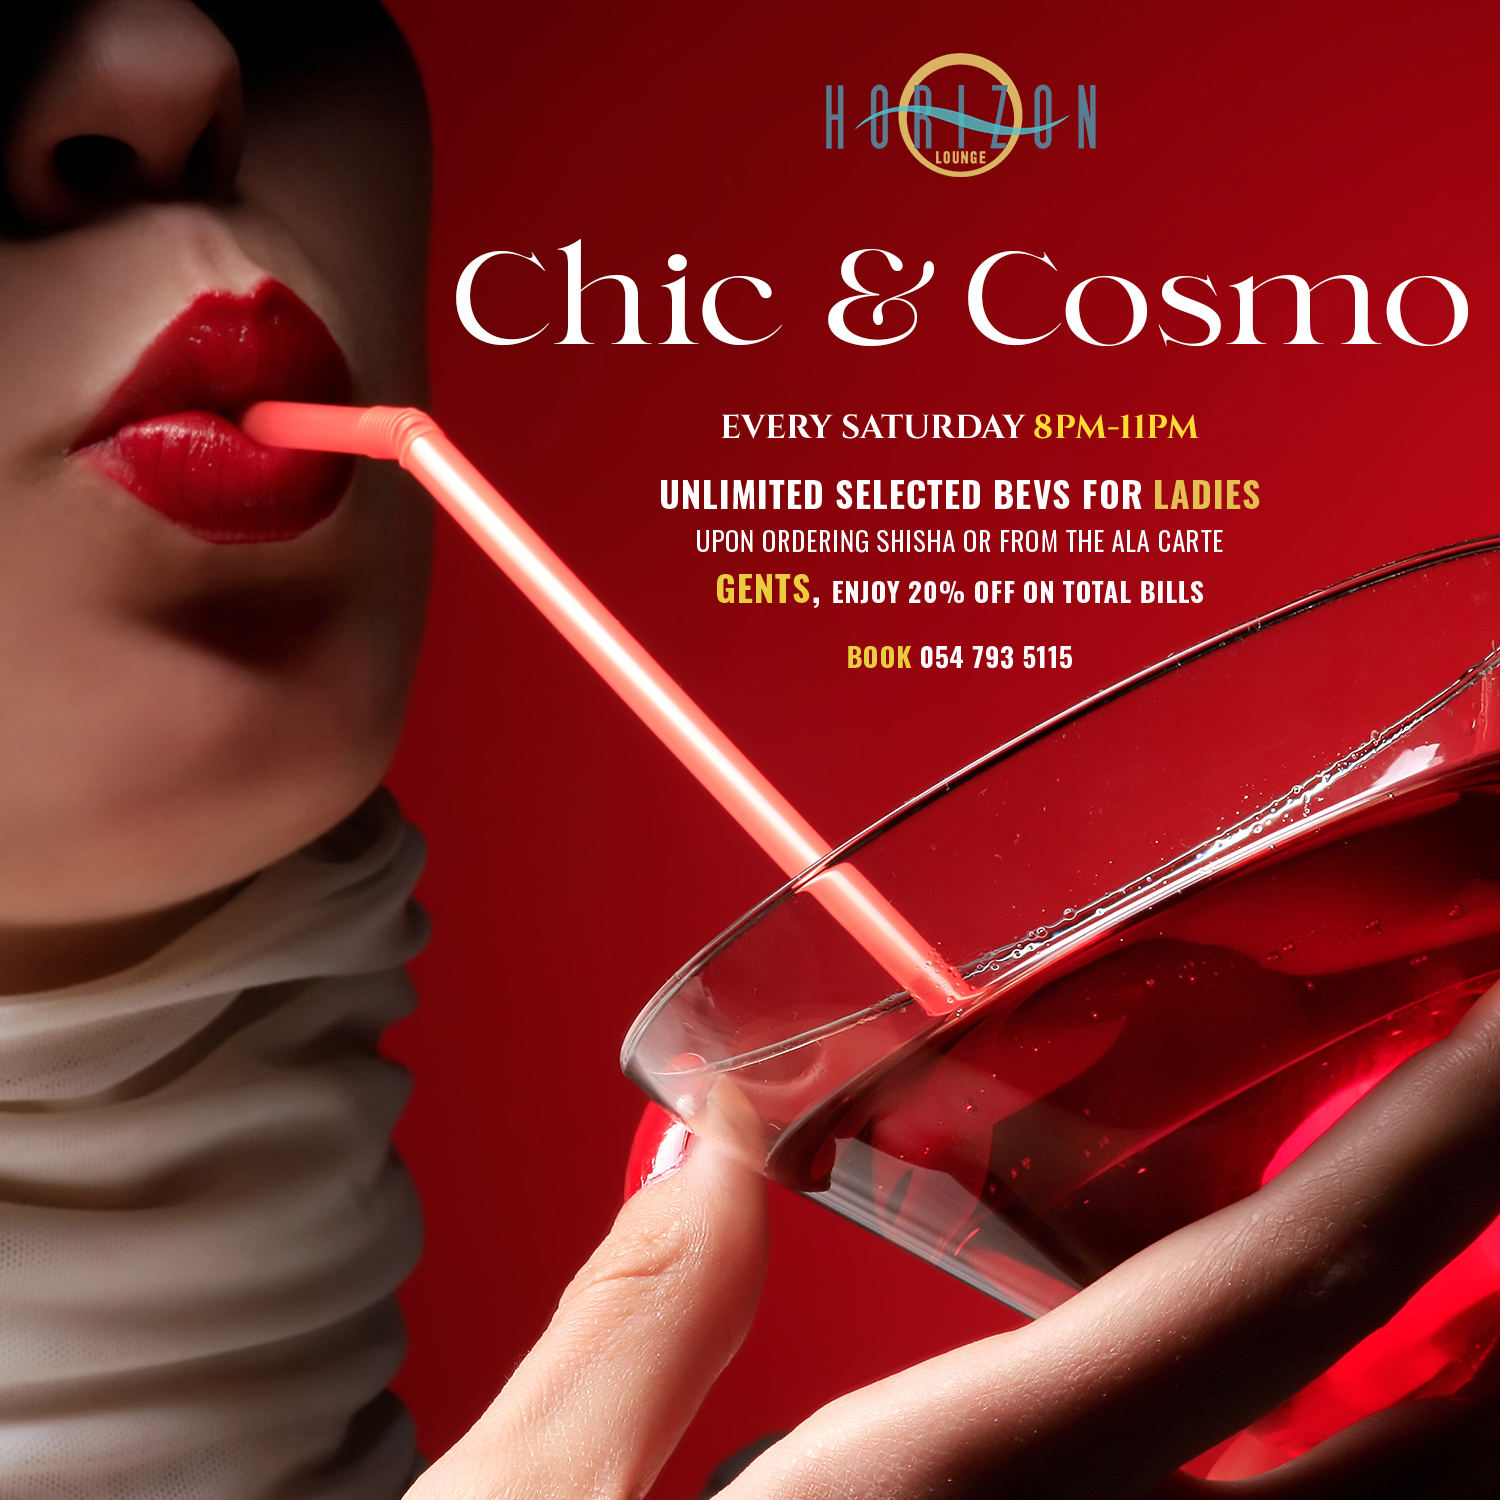 Chic & Cosmo